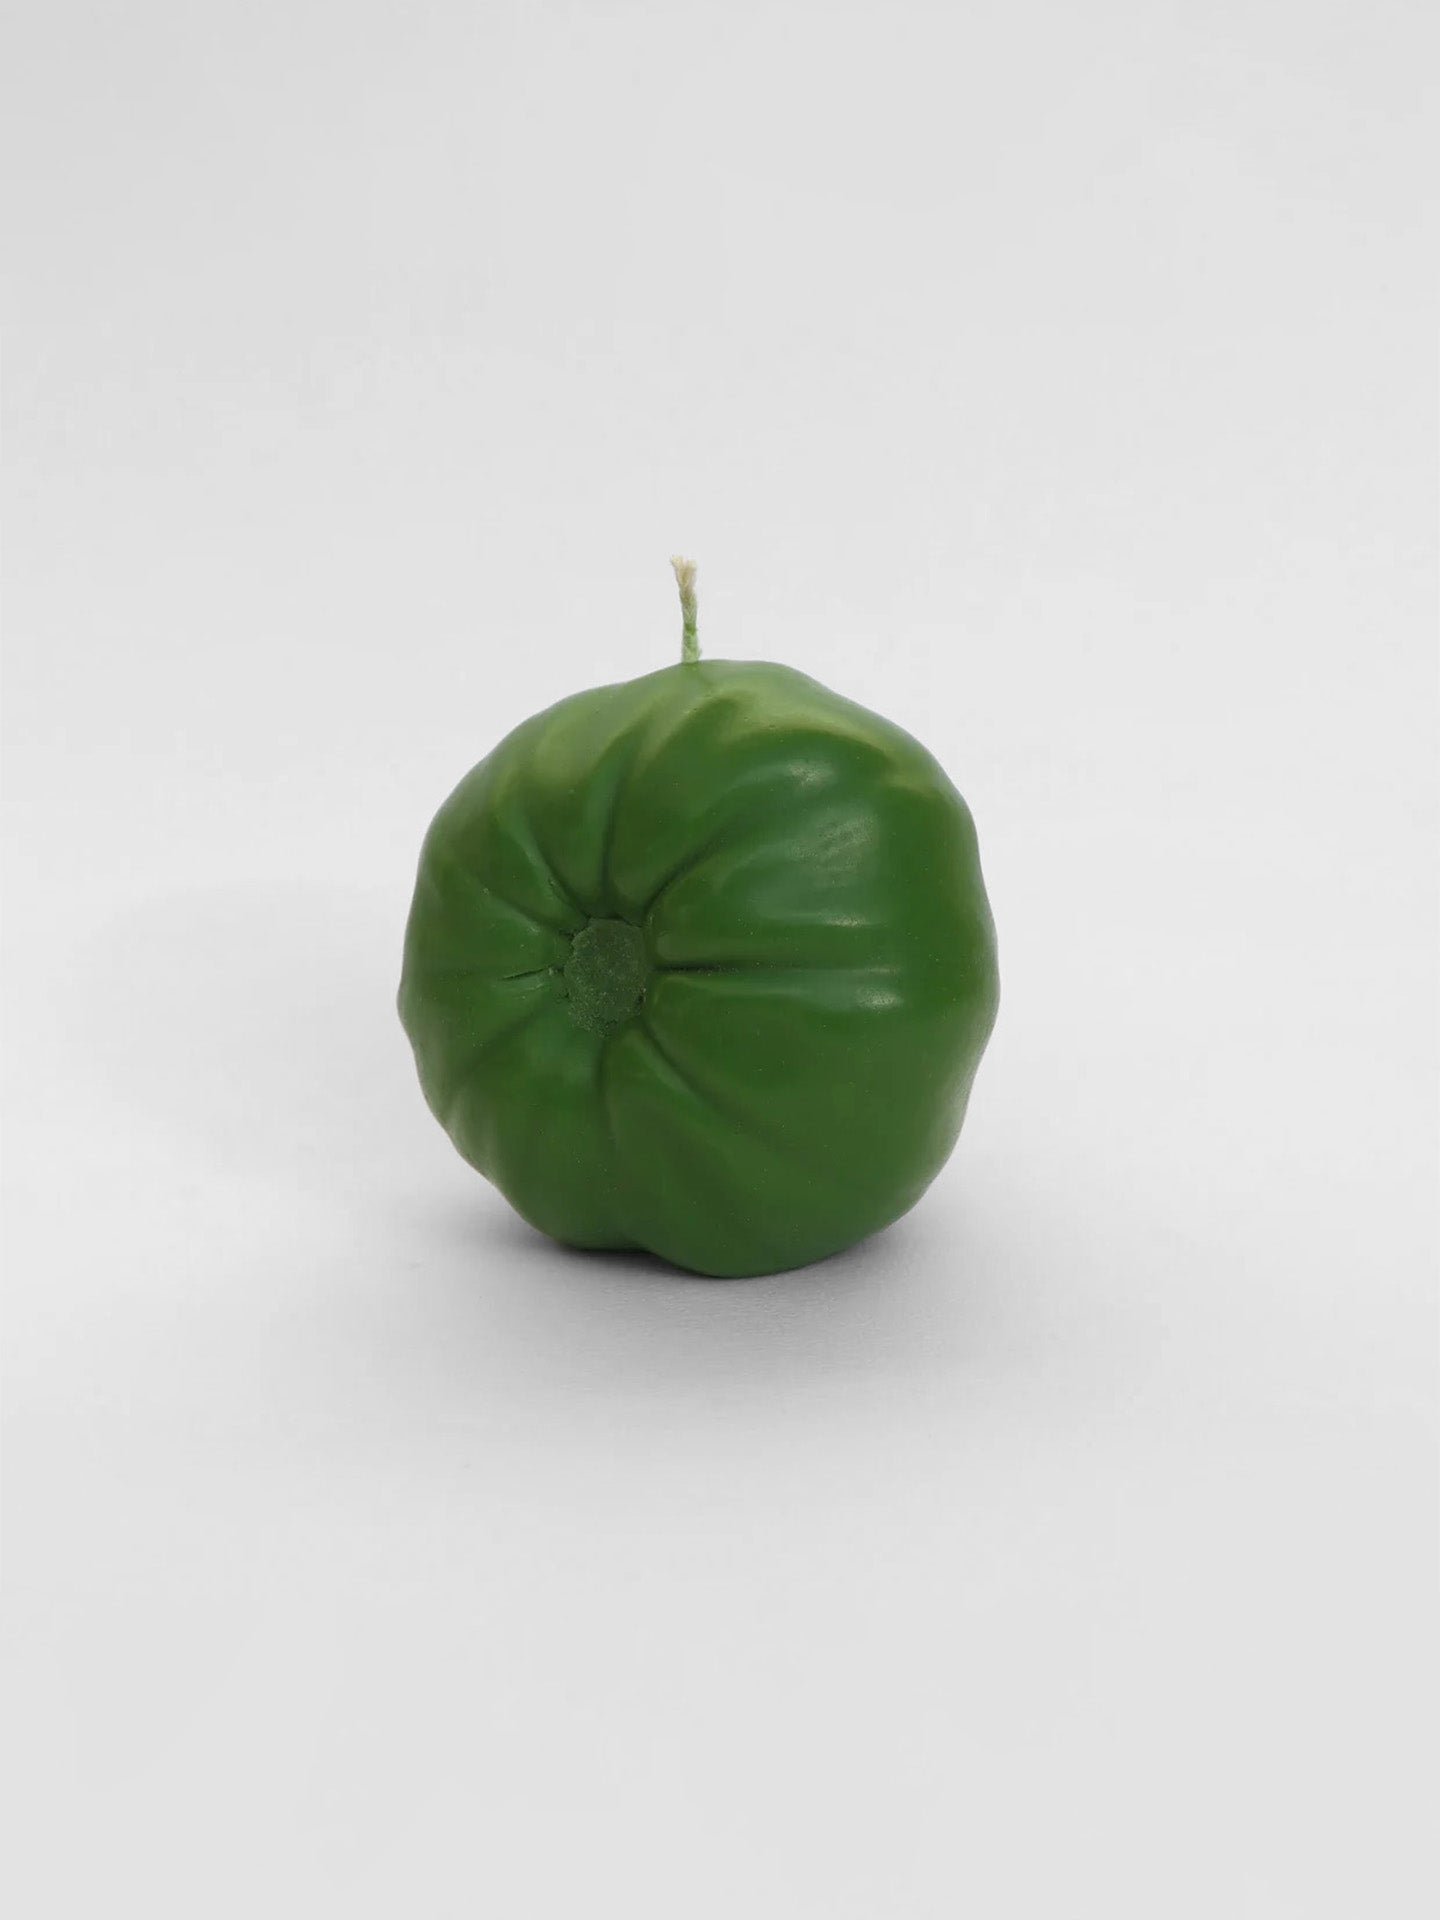 A Green Heirloom Tomato Candle - Large on a white background.